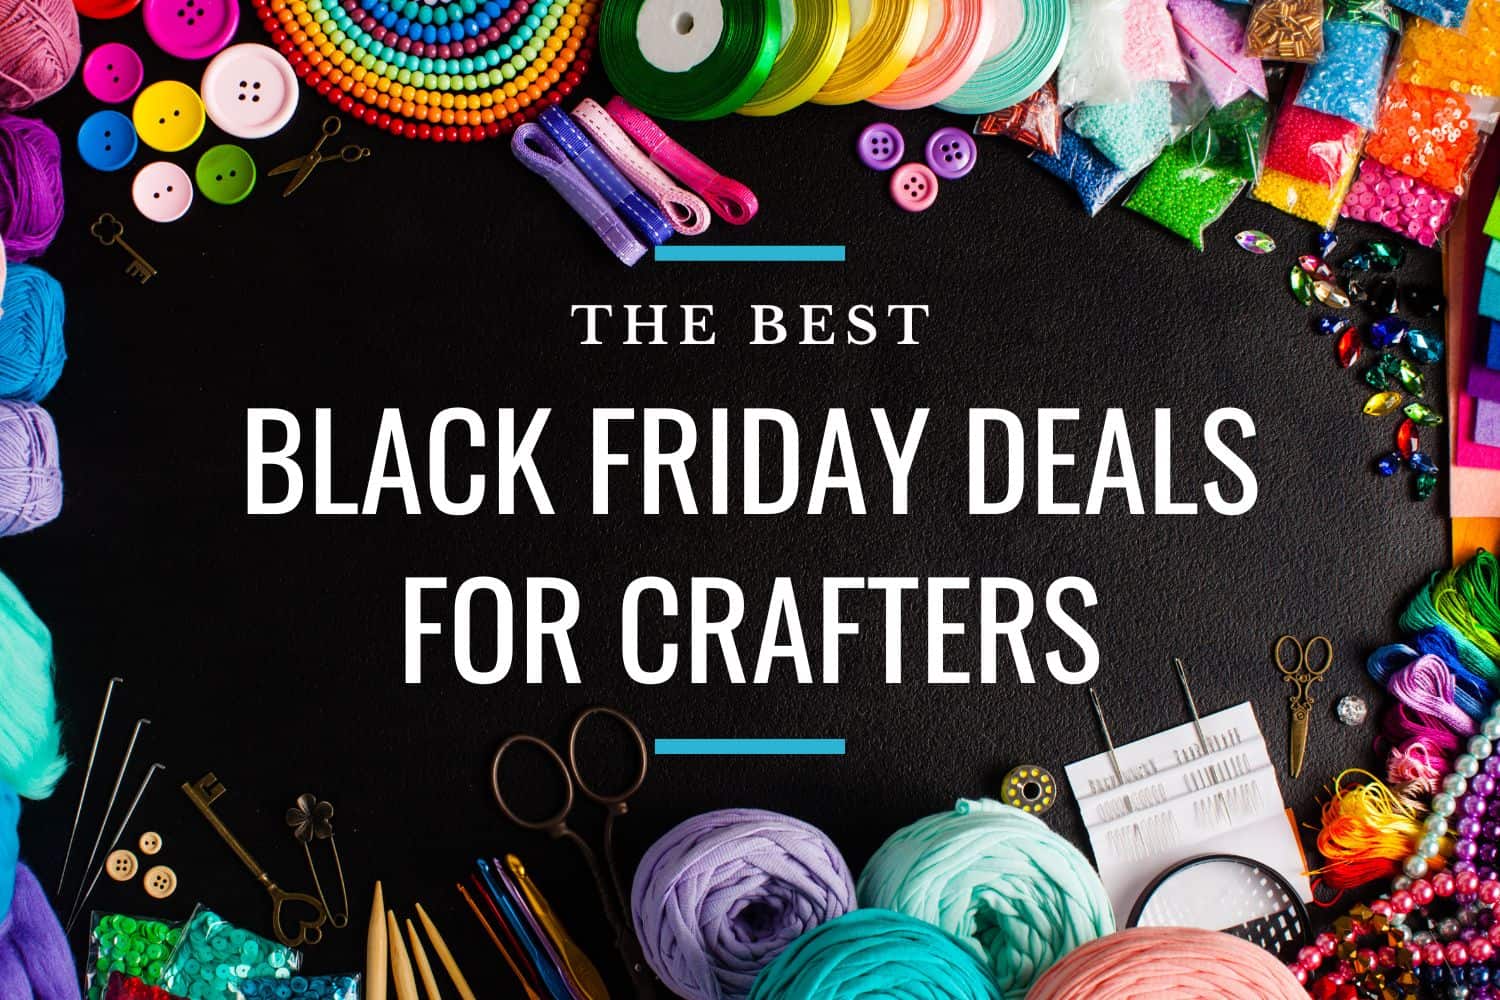 craft supplies including yarn, ribbon, buttons, knitting needle, and beads on a black background. the title reads "the best black friday deals for crafters"